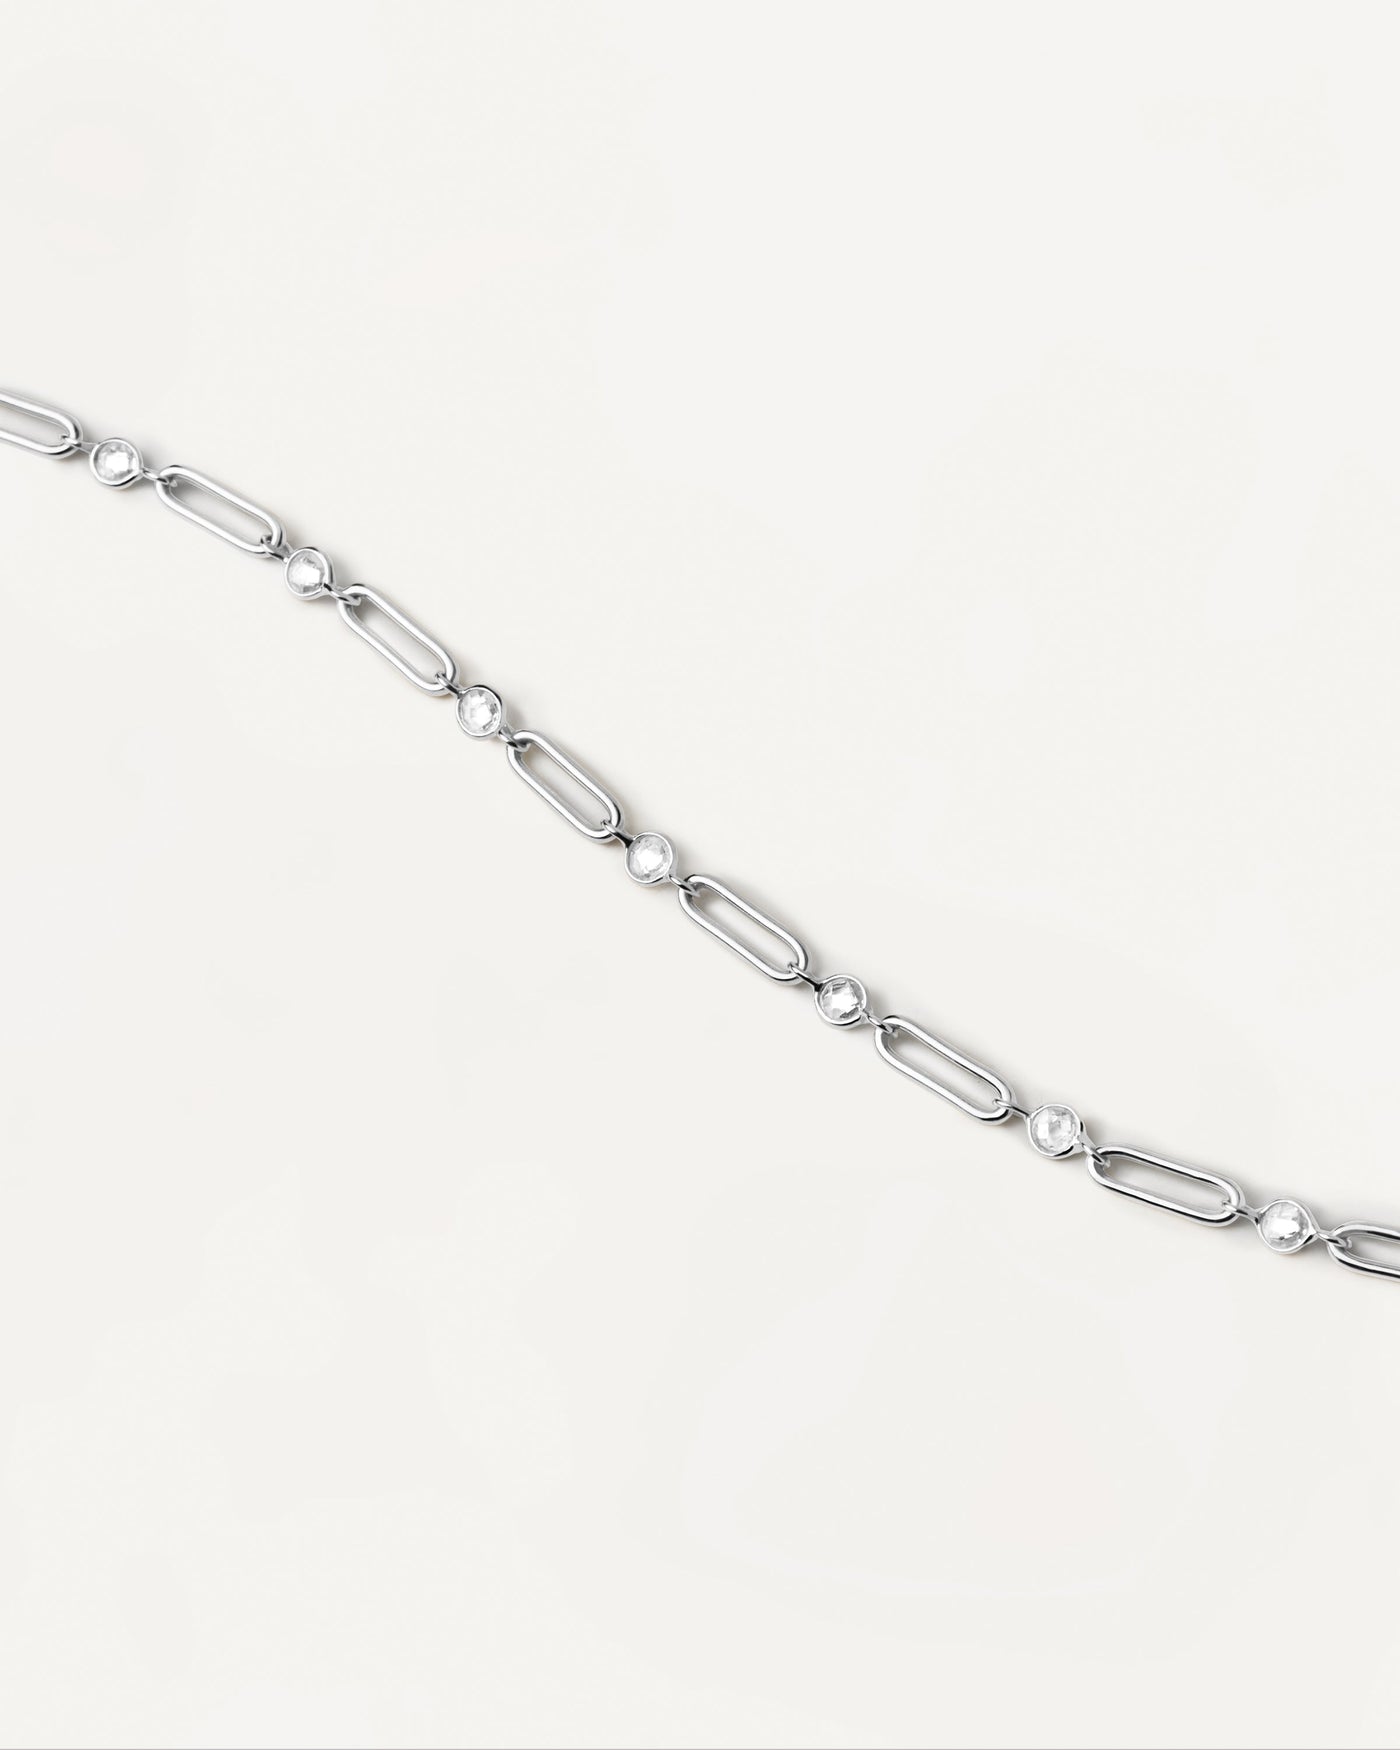 2024 Selection | Miami Silver Chain Bracelet. Large link bracelet in sterling silver set with white zirconia. Get the latest arrival from PDPAOLA. Place your order safely and get this Best Seller. Free Shipping.